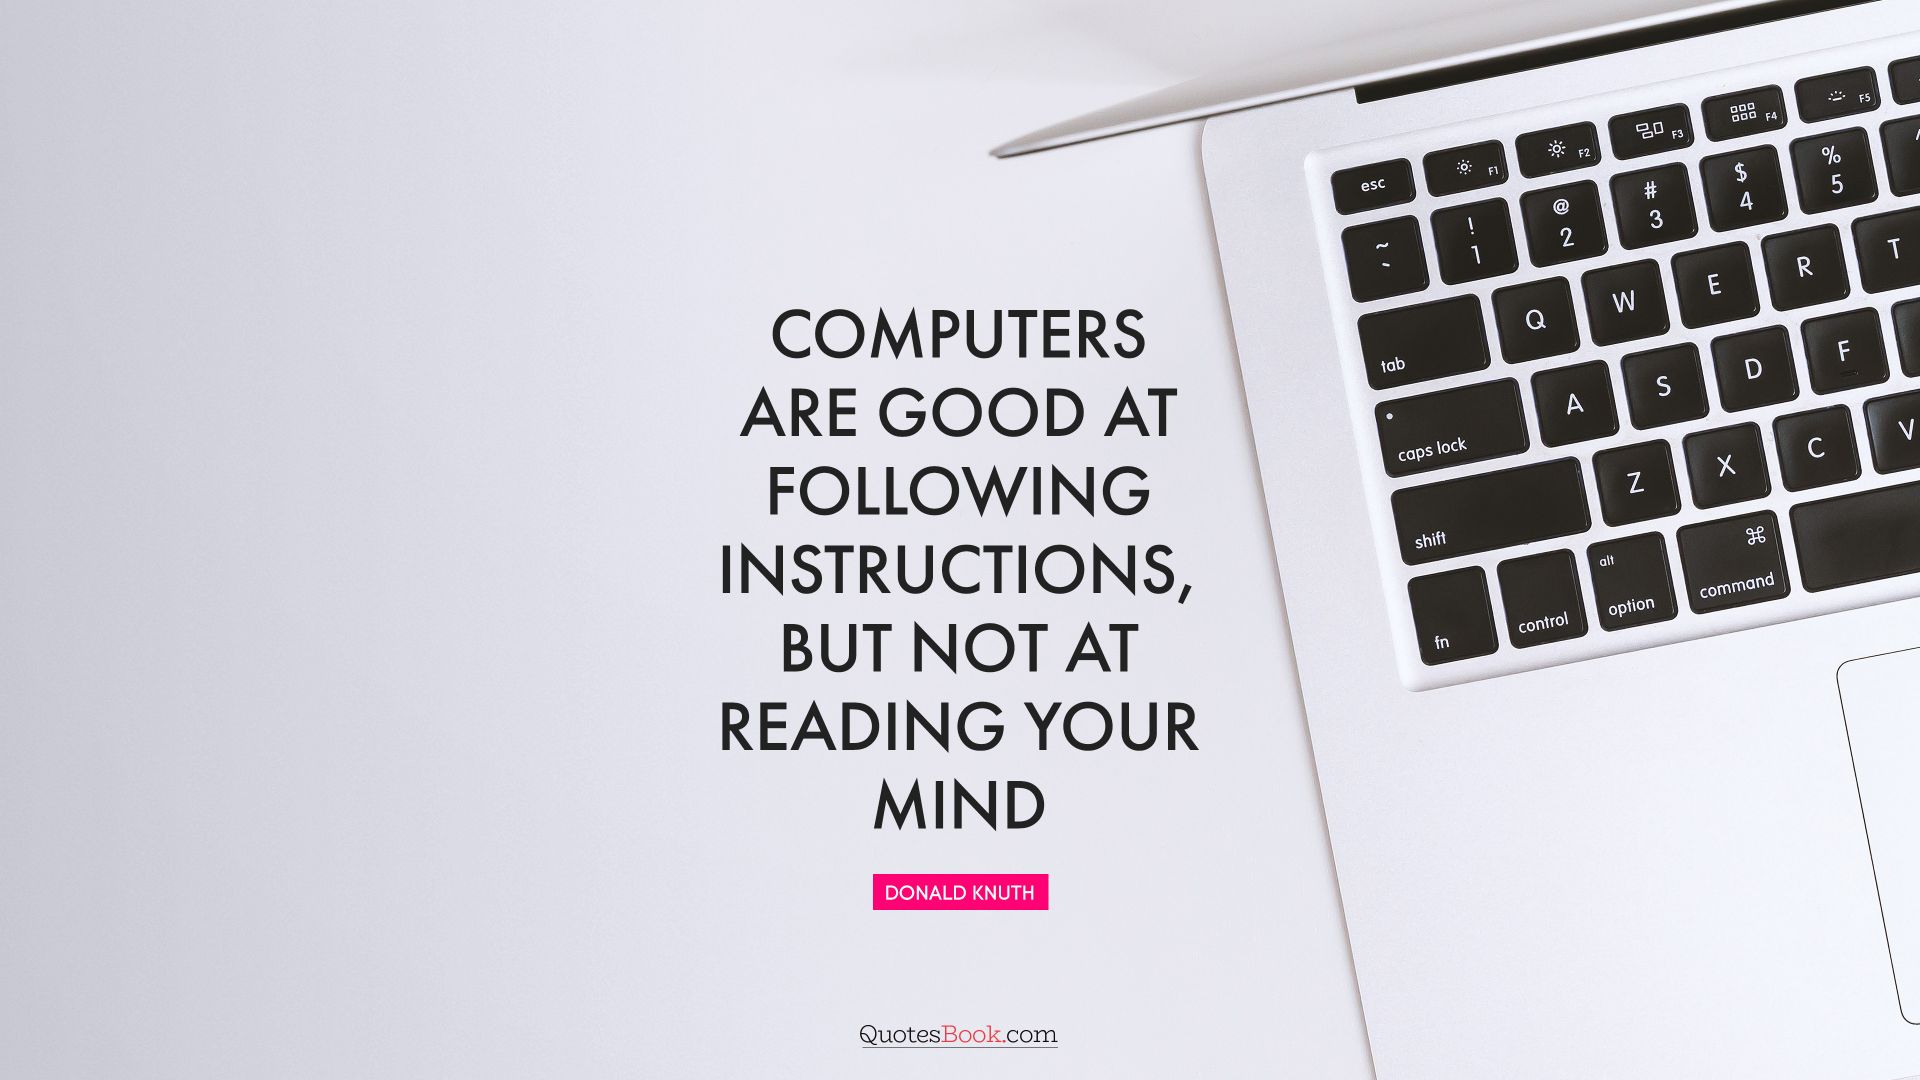 “Computers are good at following instructions, but not at reading your mind” – Donald Knuth